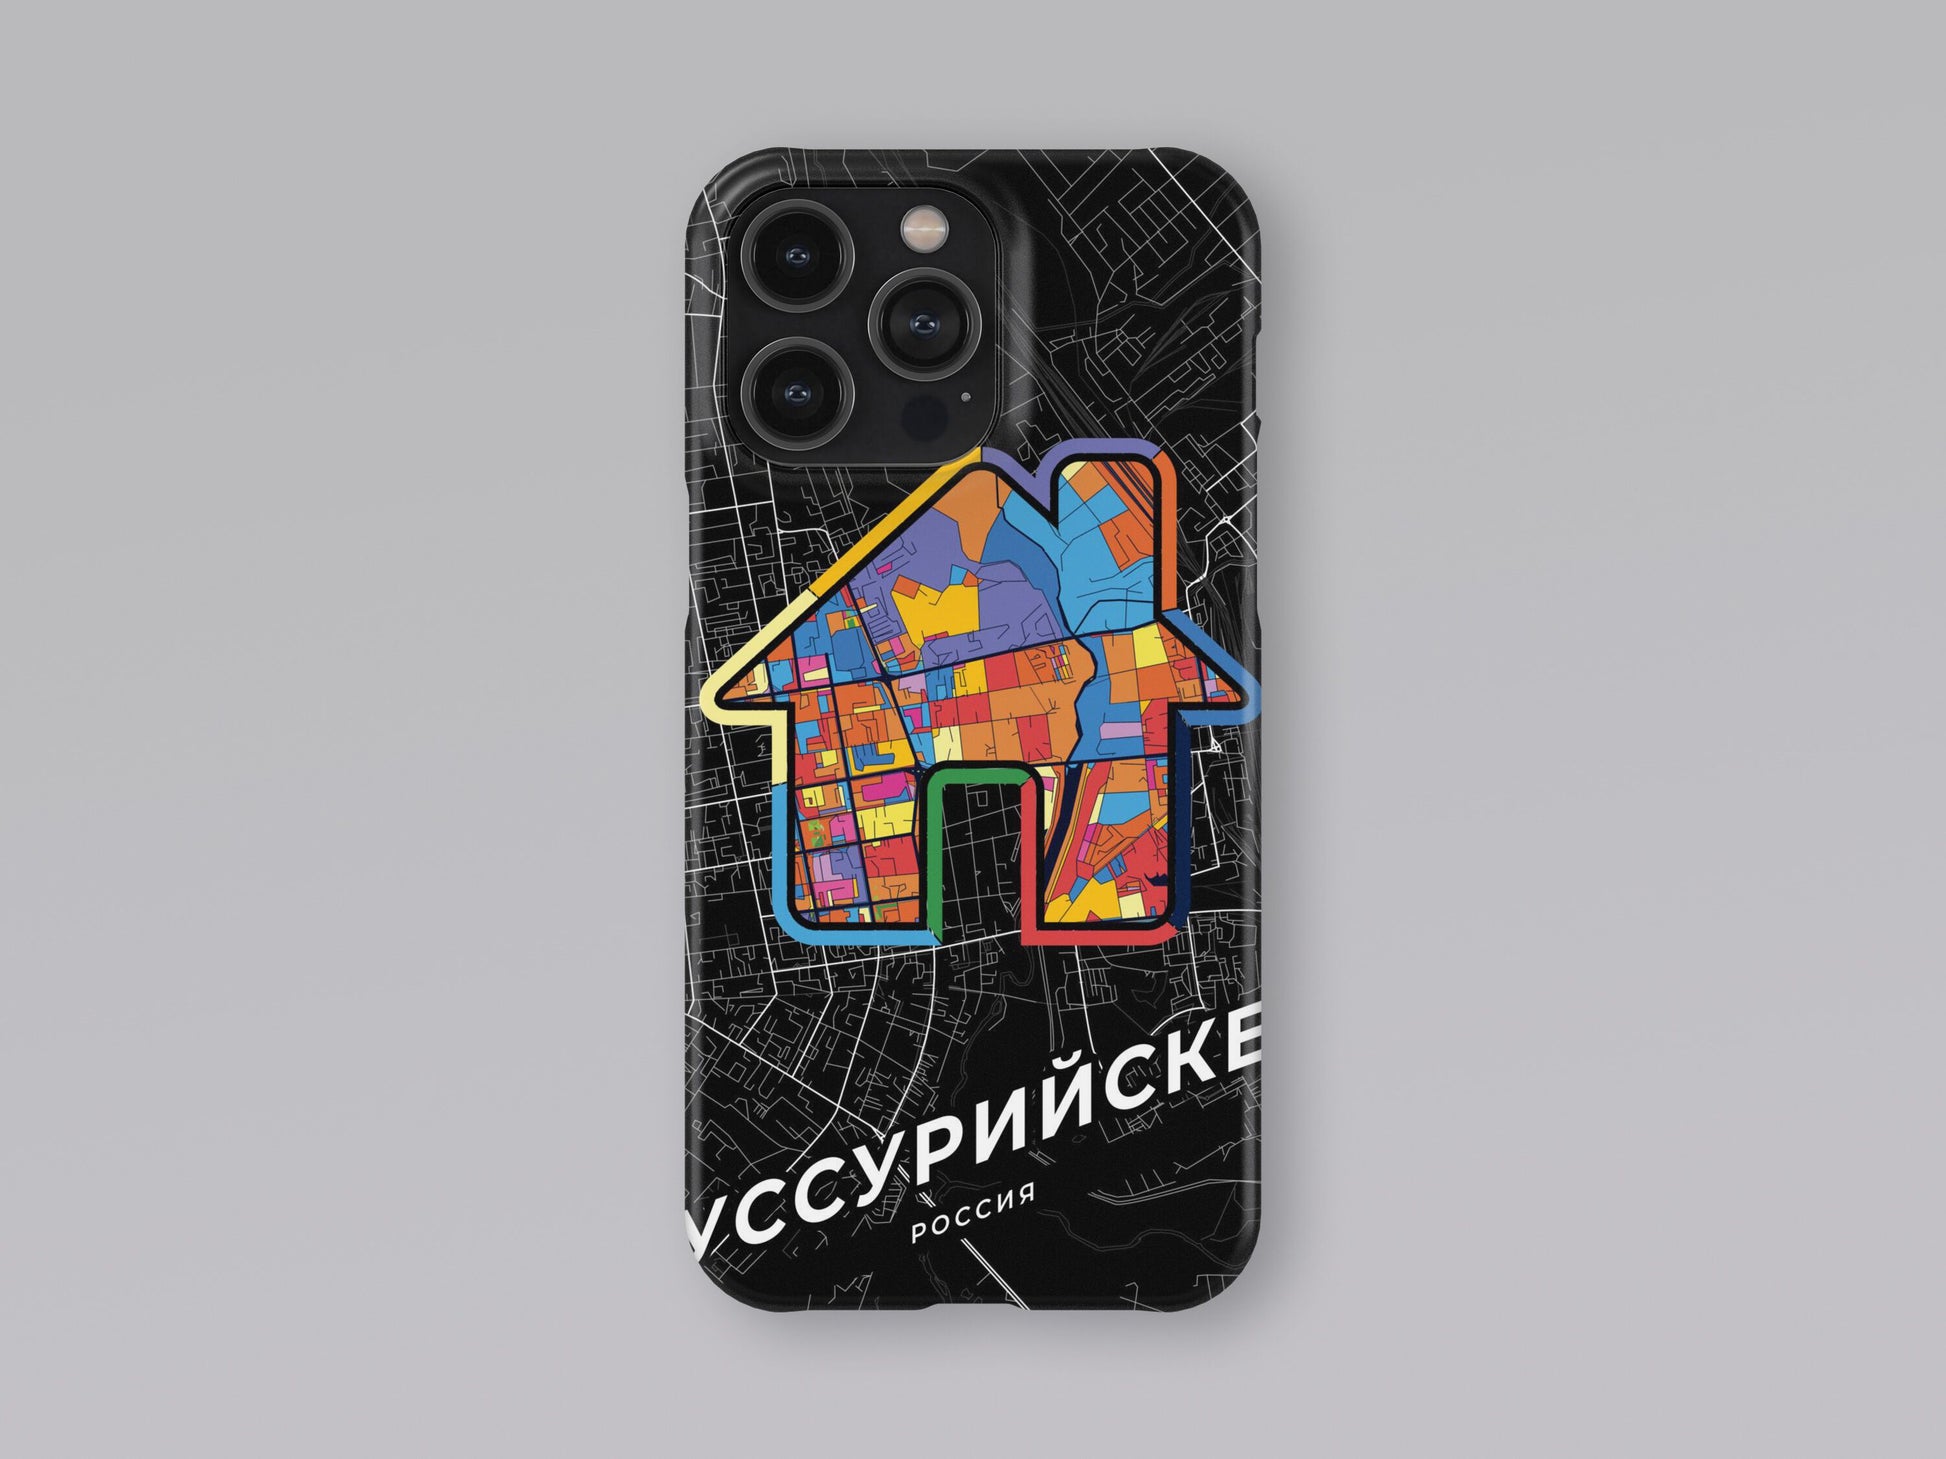 Ussuriysk Russia slim phone case with colorful icon 3